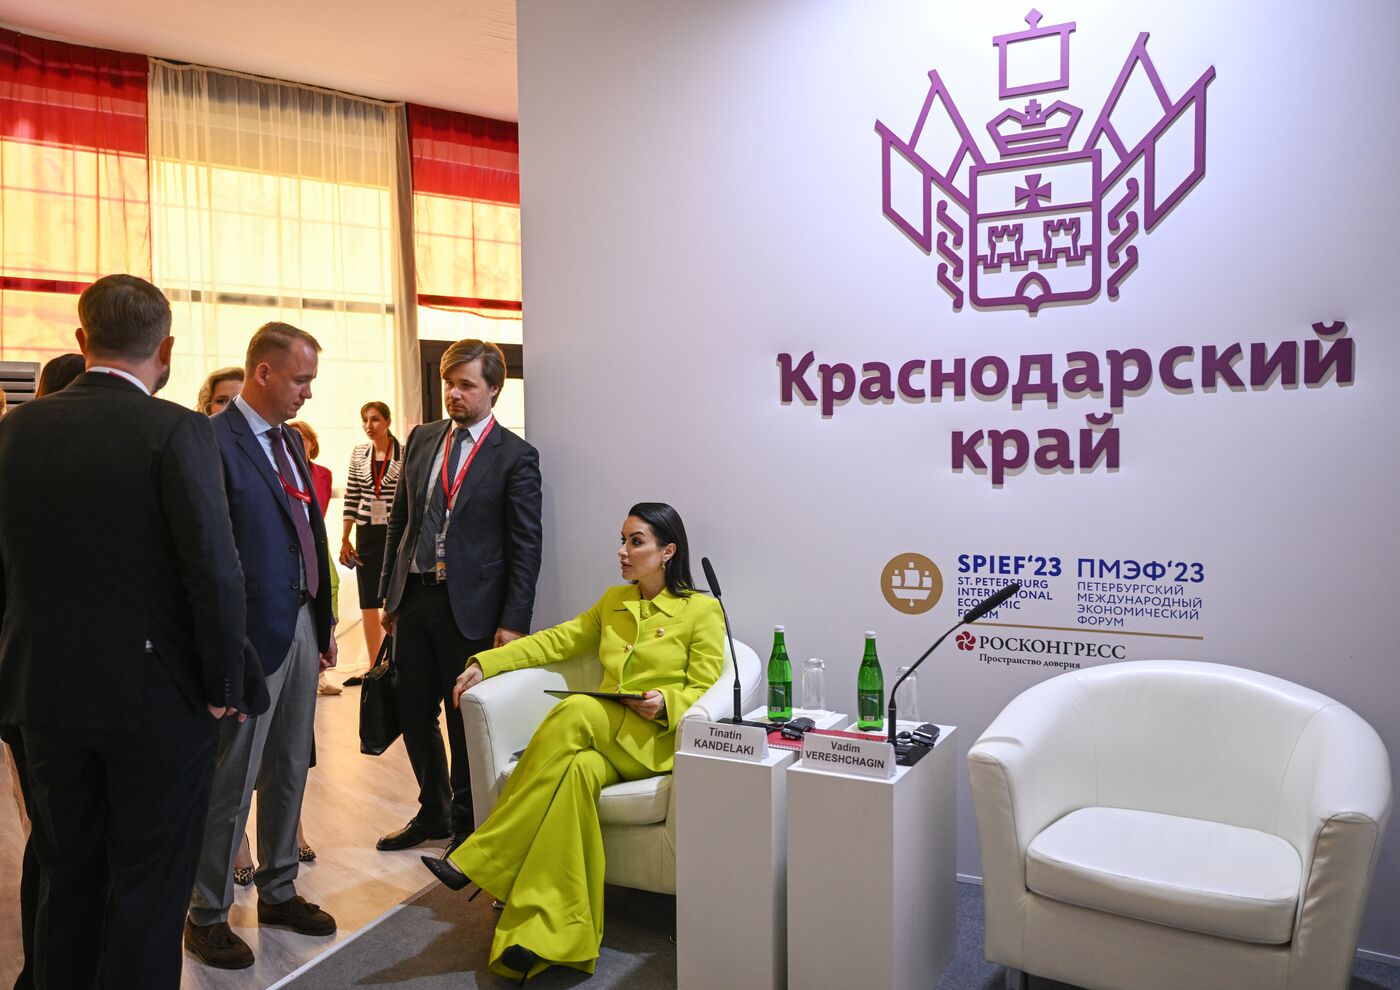 SPIEF-2023. Film and Series Production in Russia Today: Support in the Context of Sanctions